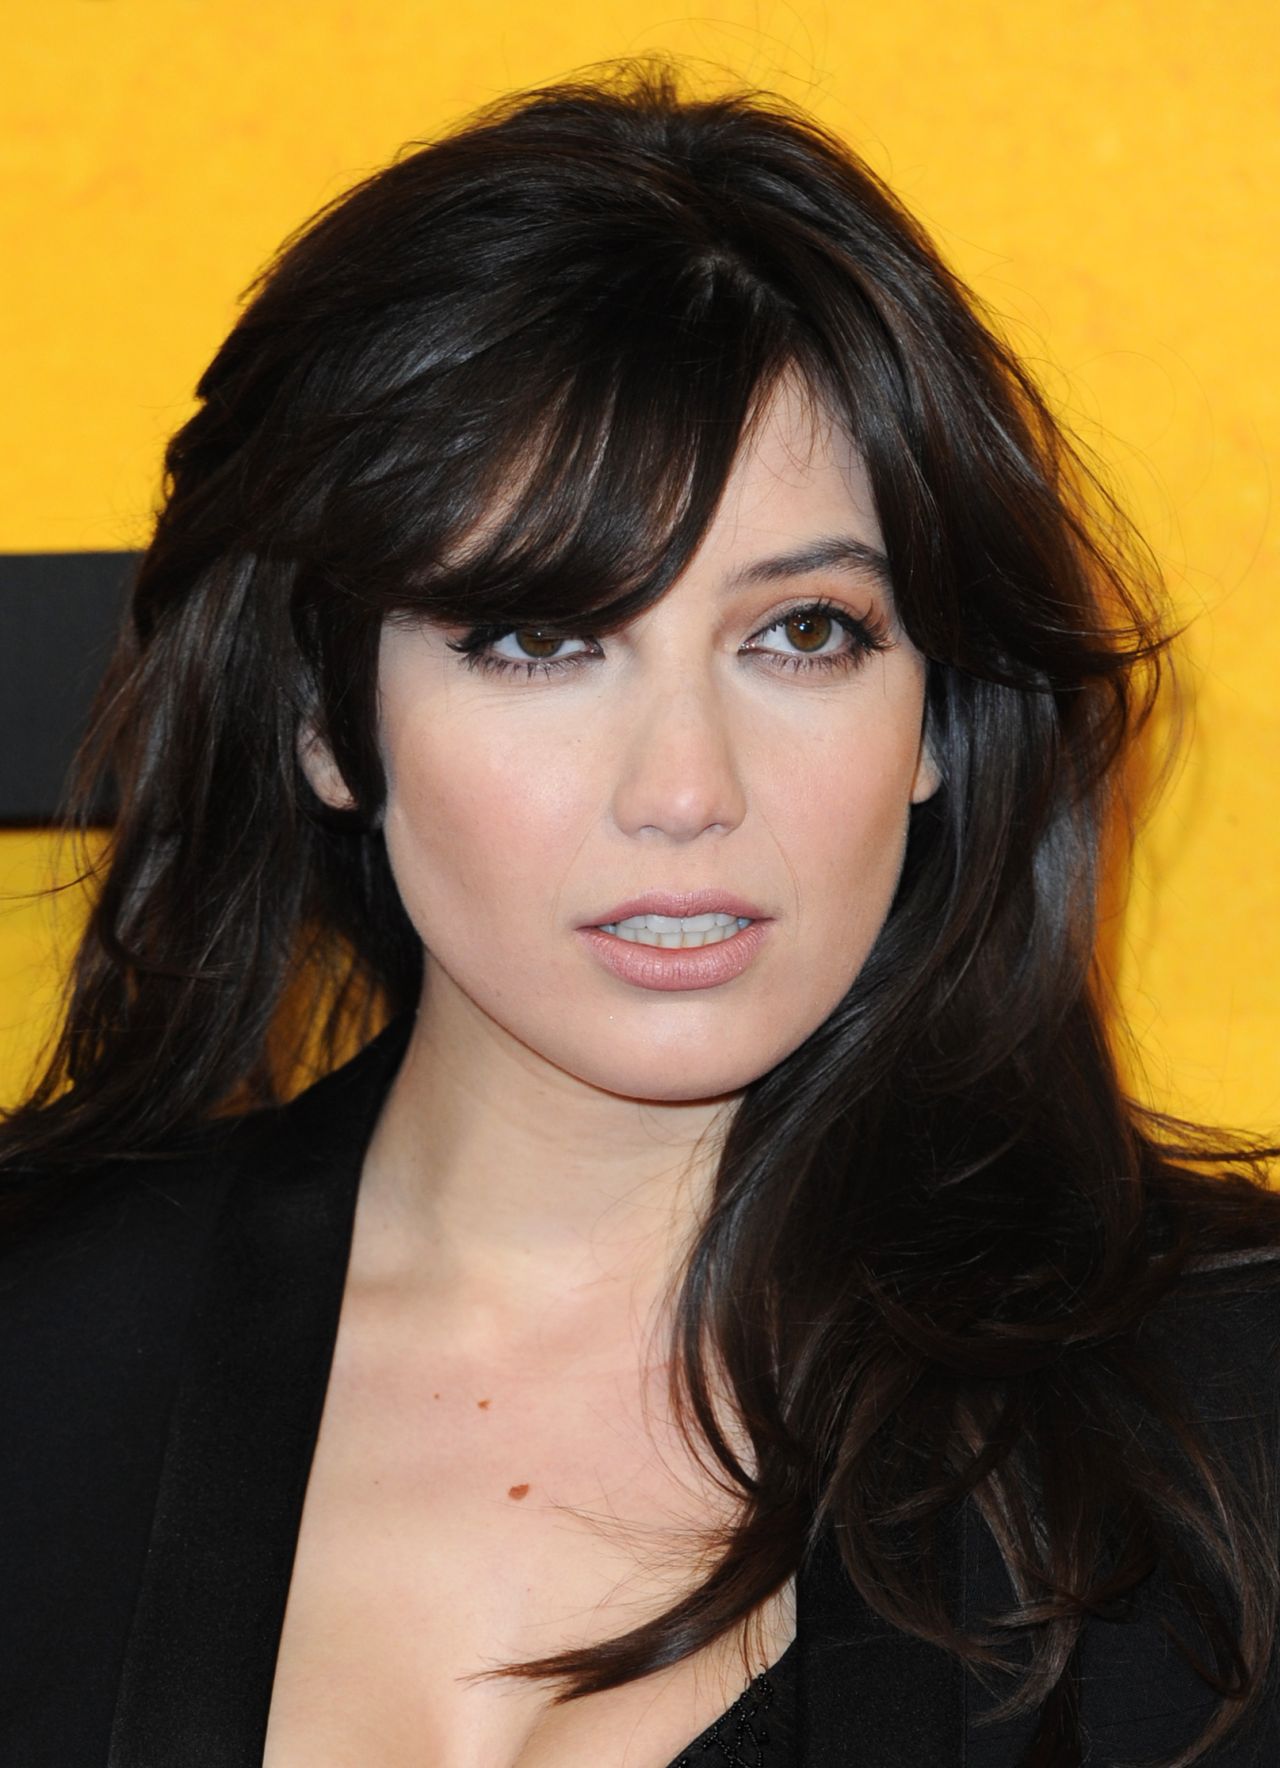 Daisy Lowe at UK Premiere of The Wolf of Wall Street - daisy-lowe-at-uk-premiere-of-the-wolf-of-wall-street_1